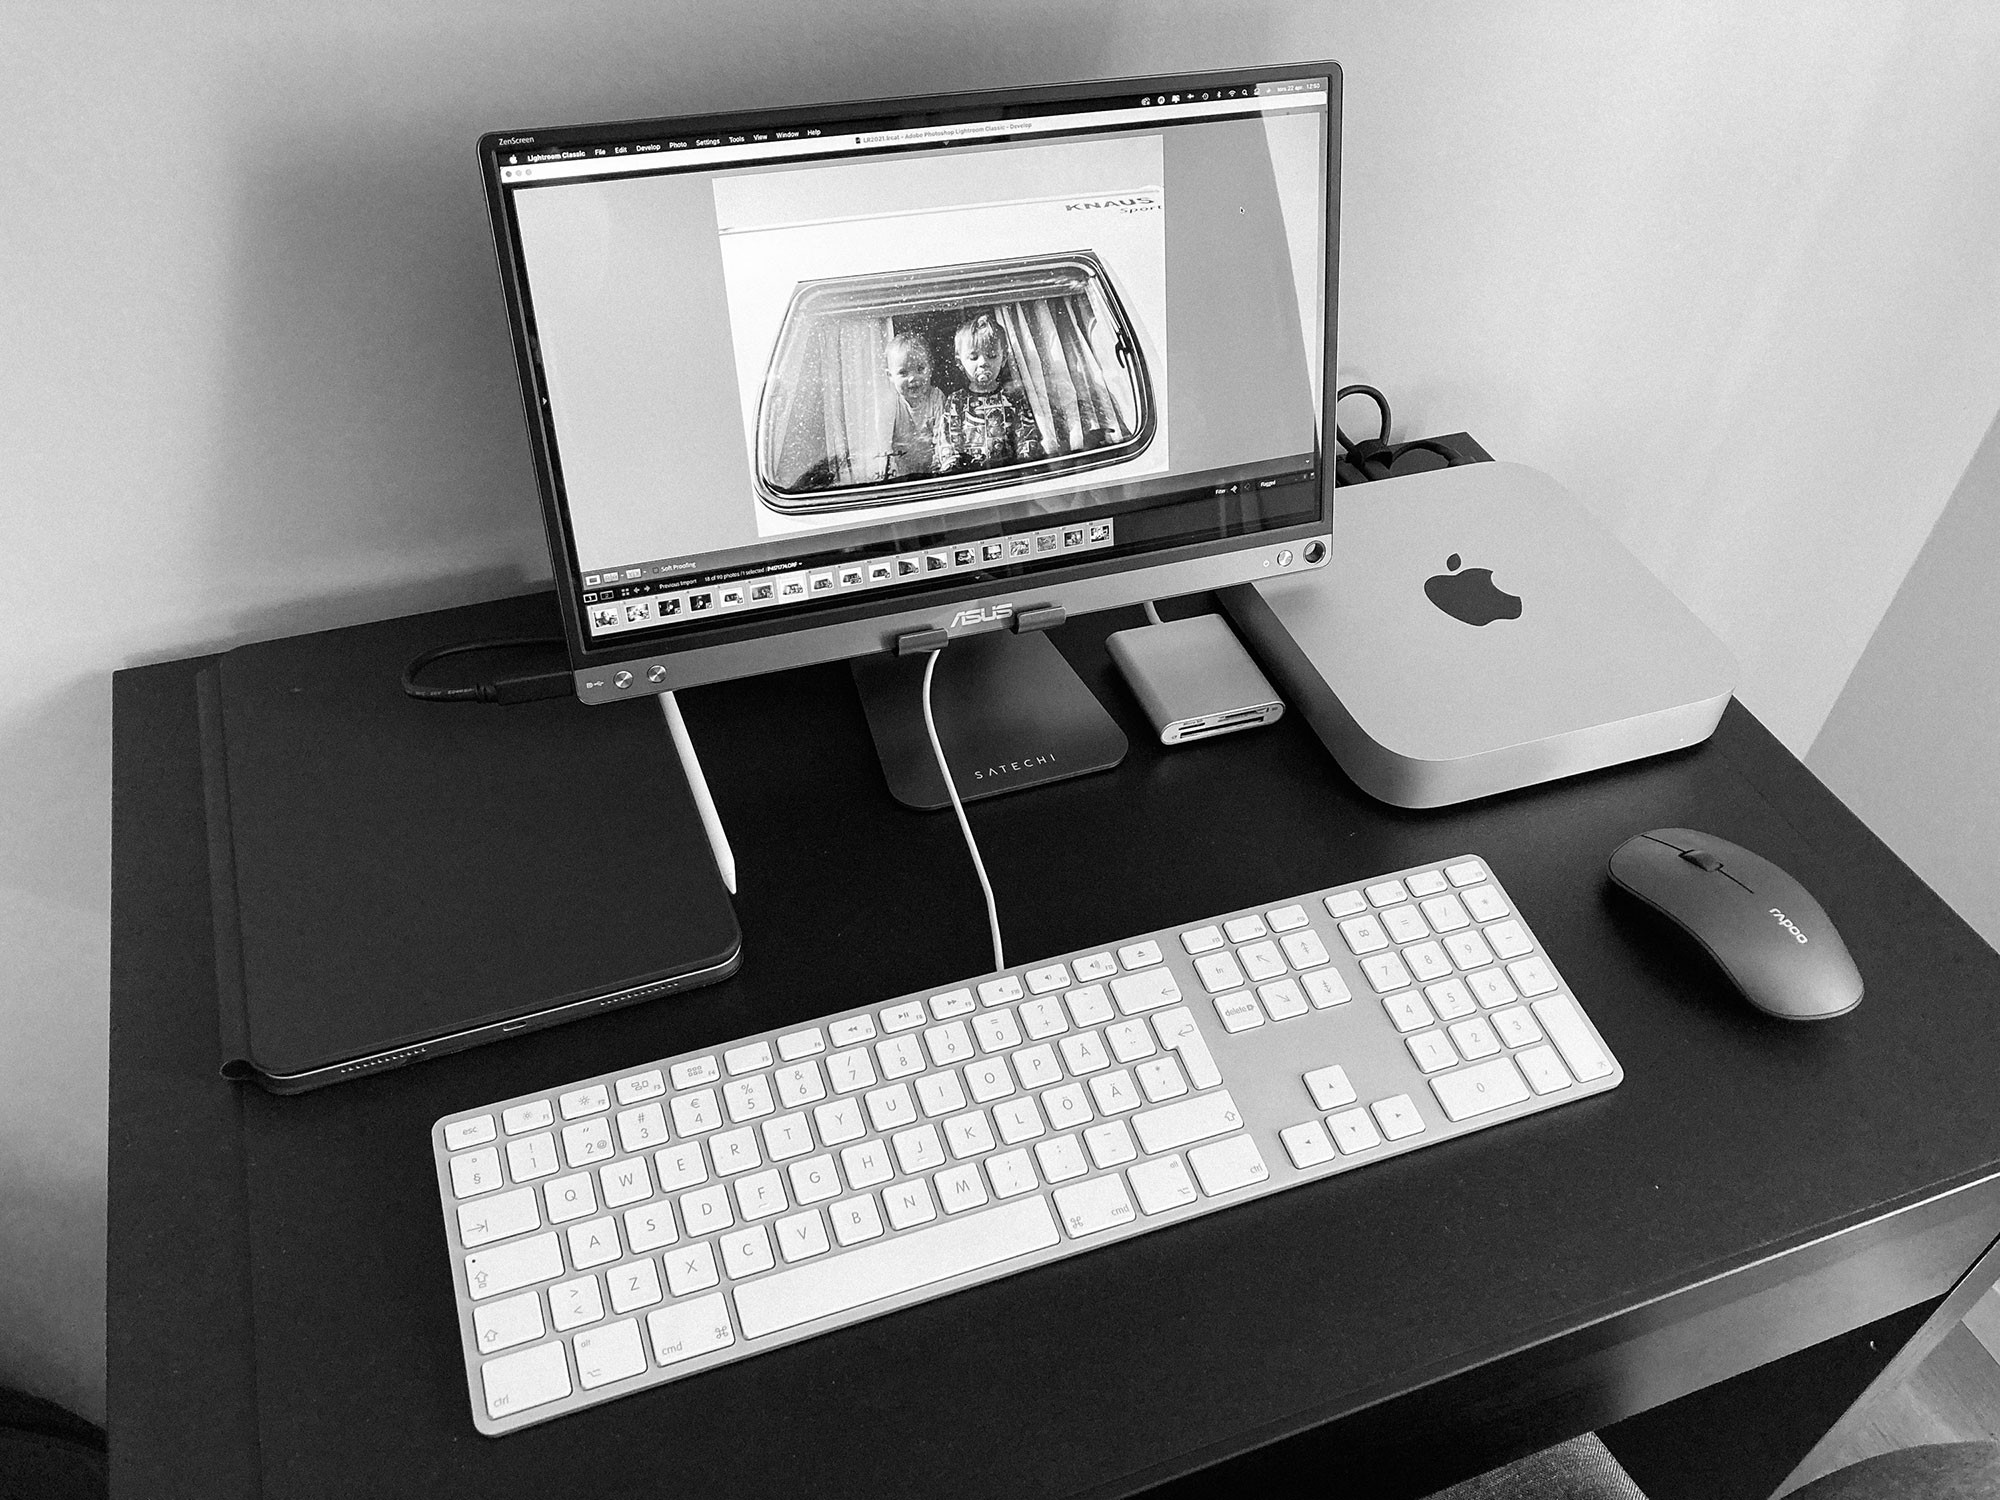 Apple Mac Mini M1 for photographers - A compact but powerful